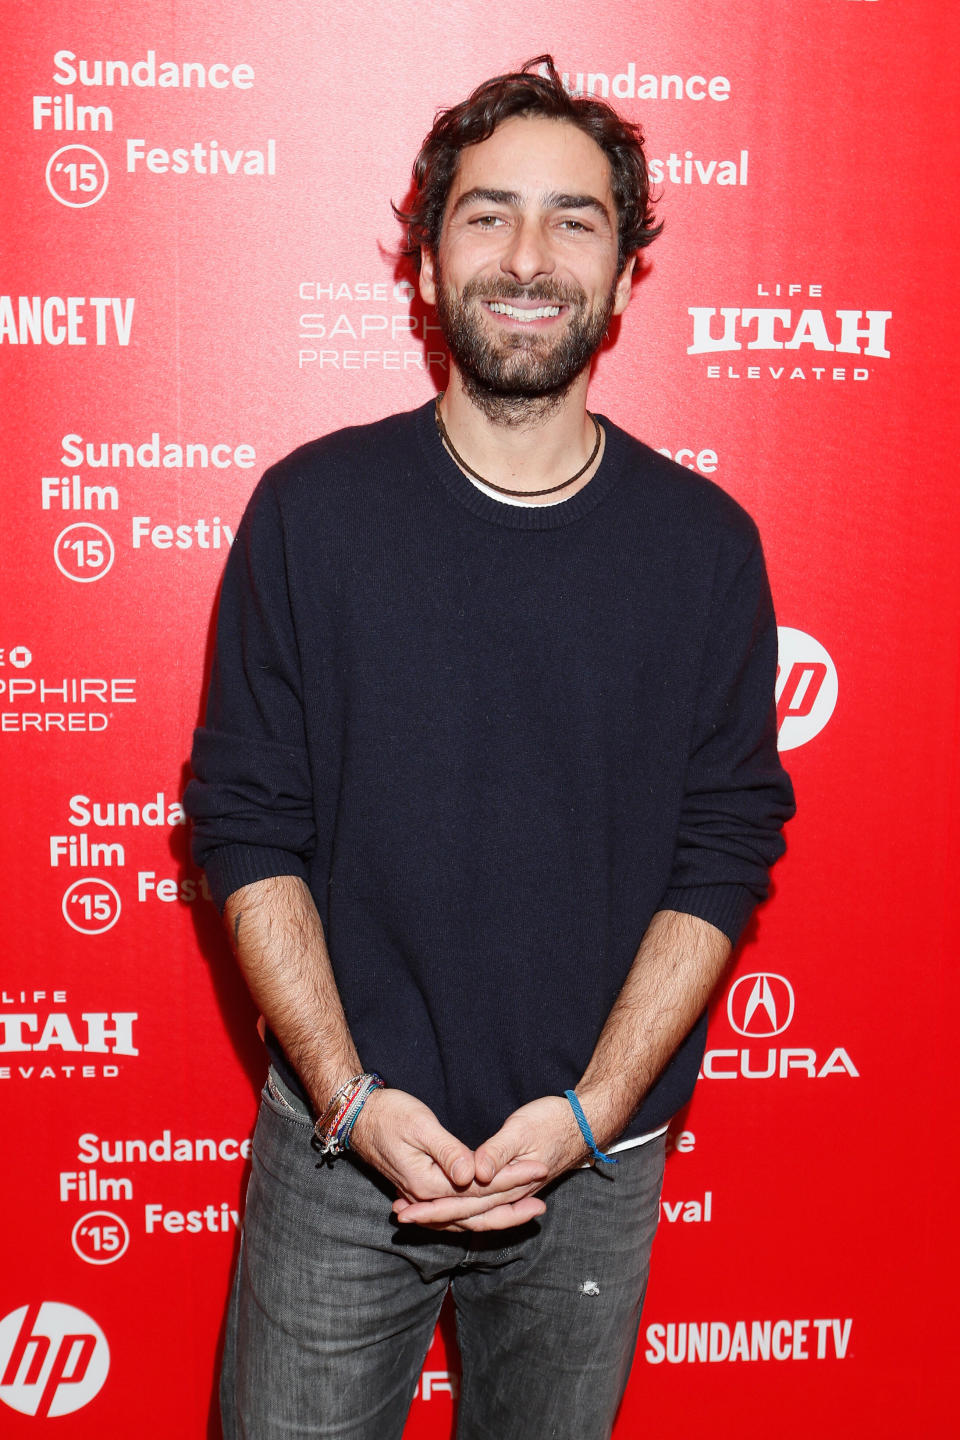  (Photo by Chad Hurst/Getty Images for Sundance)